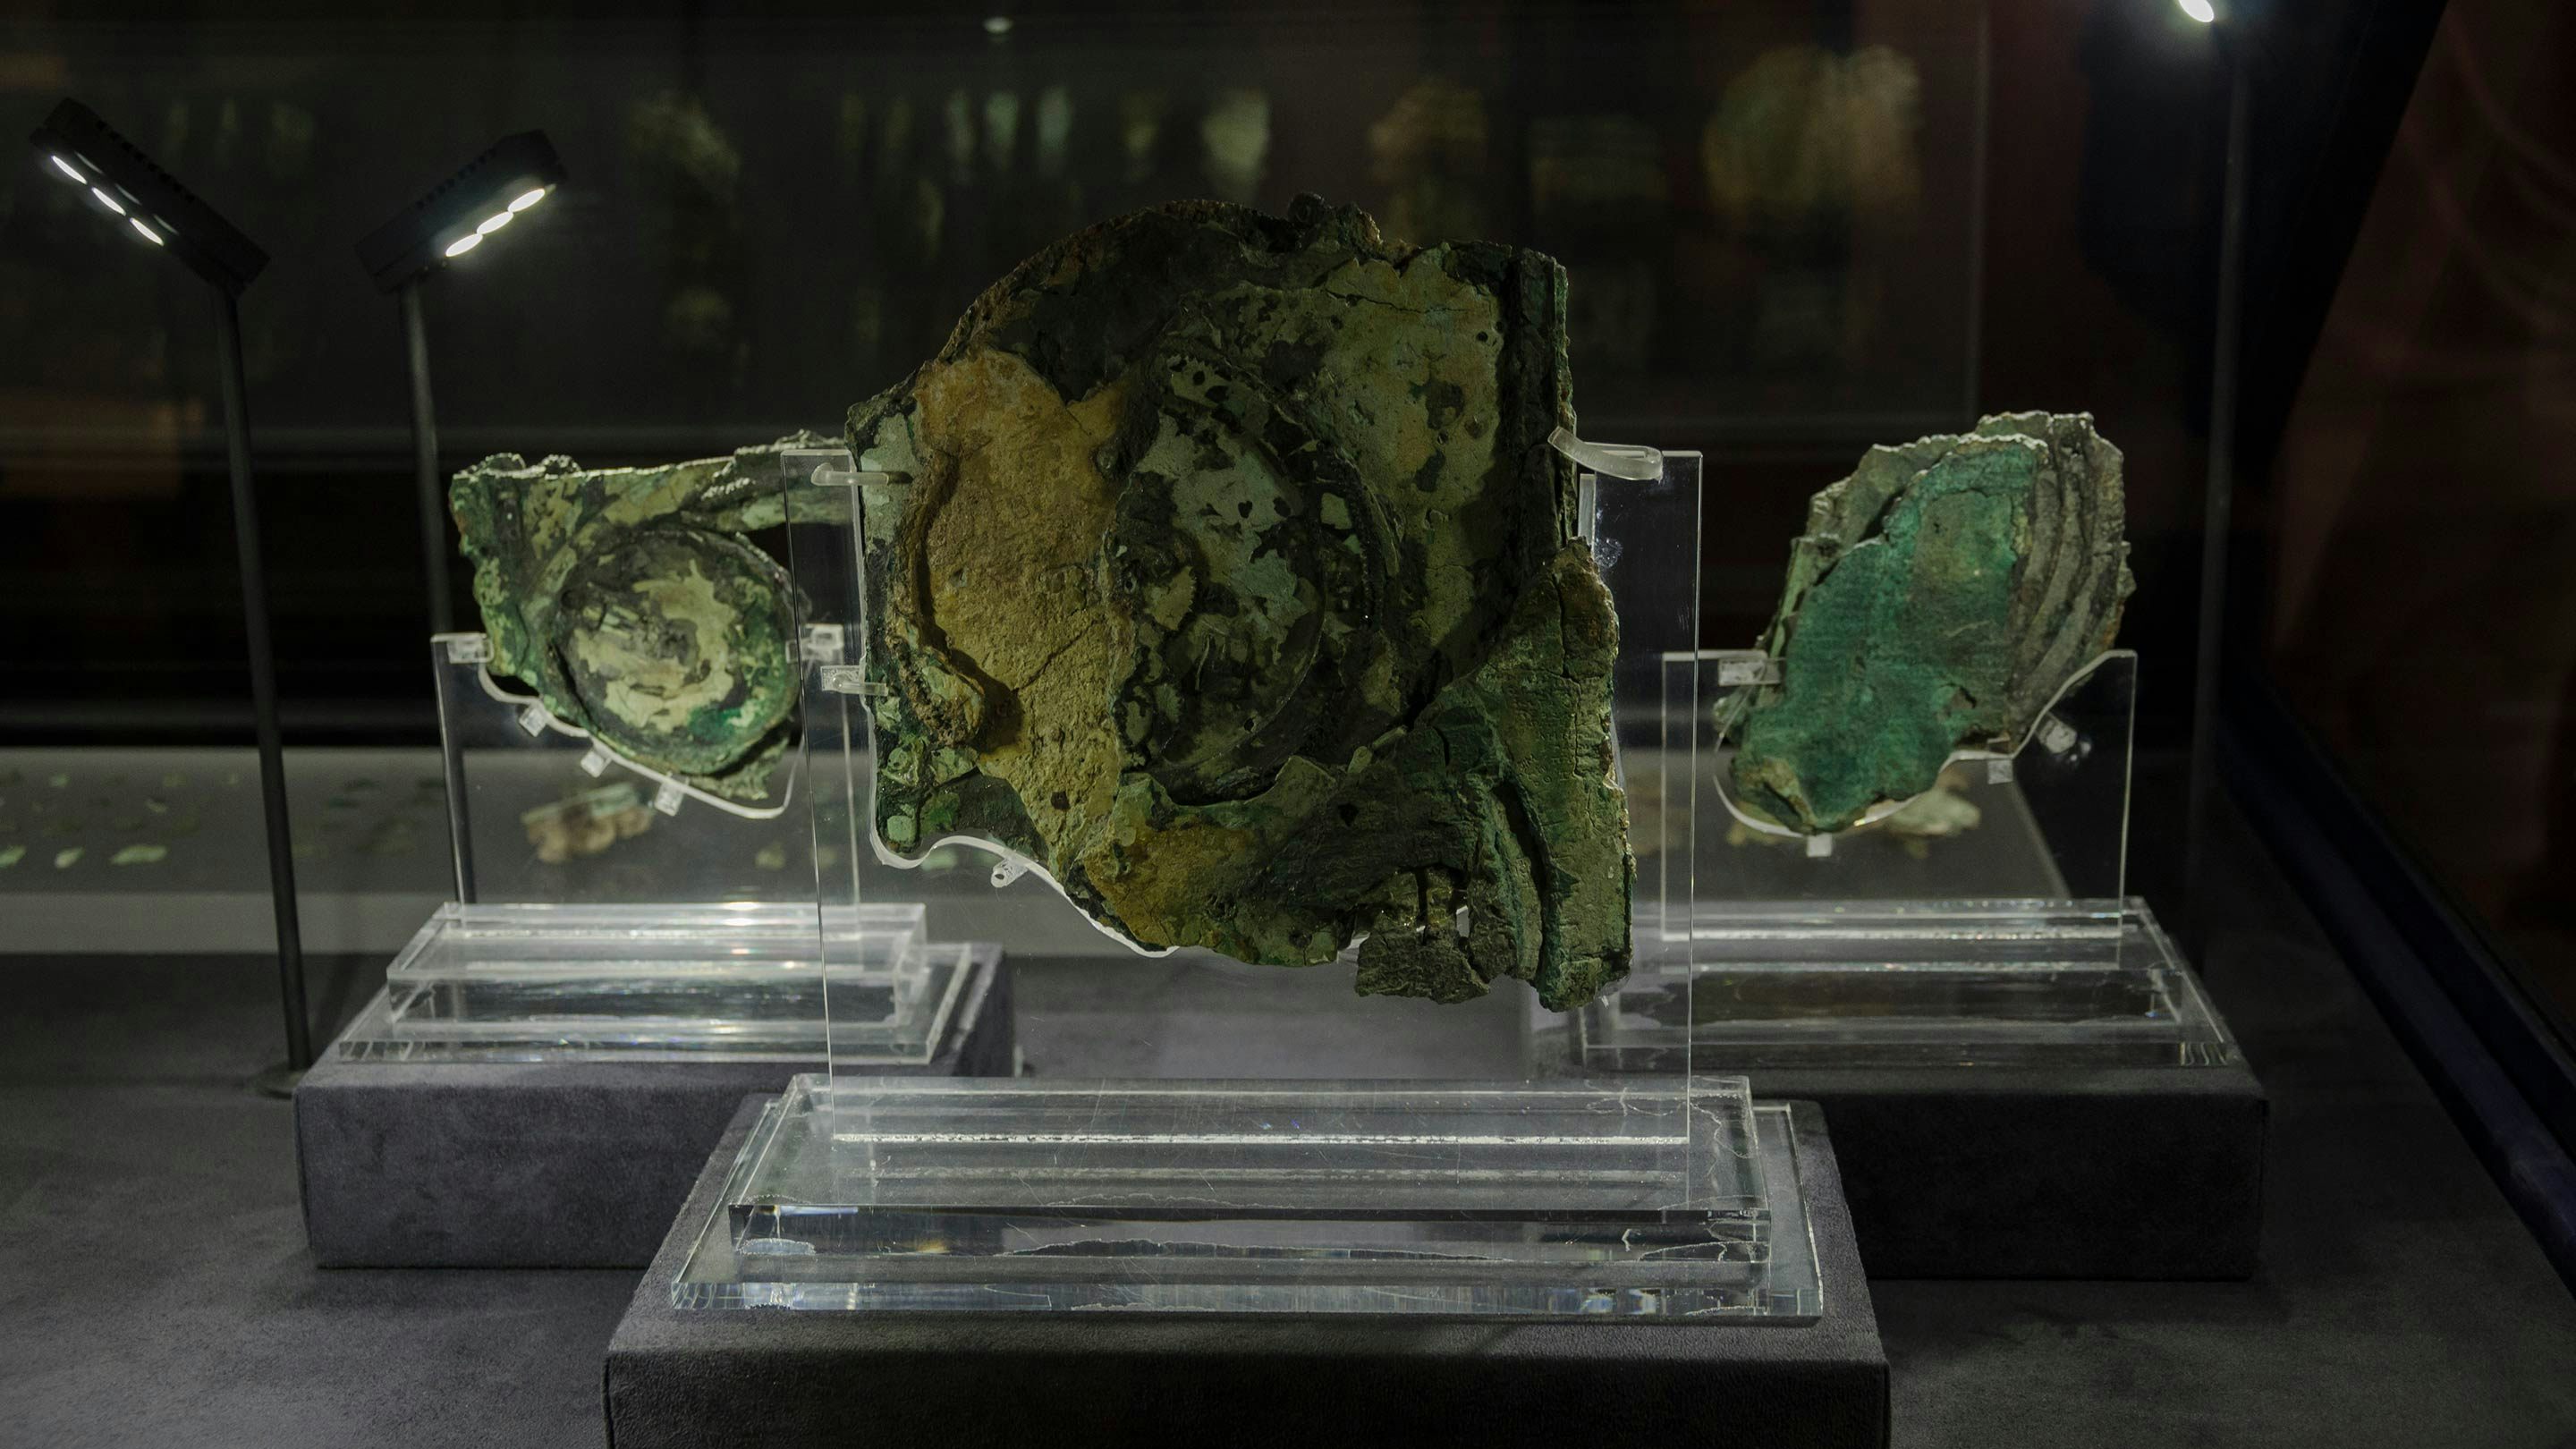 The Antikythera Mechanism is astronomical computer of amazing complexity